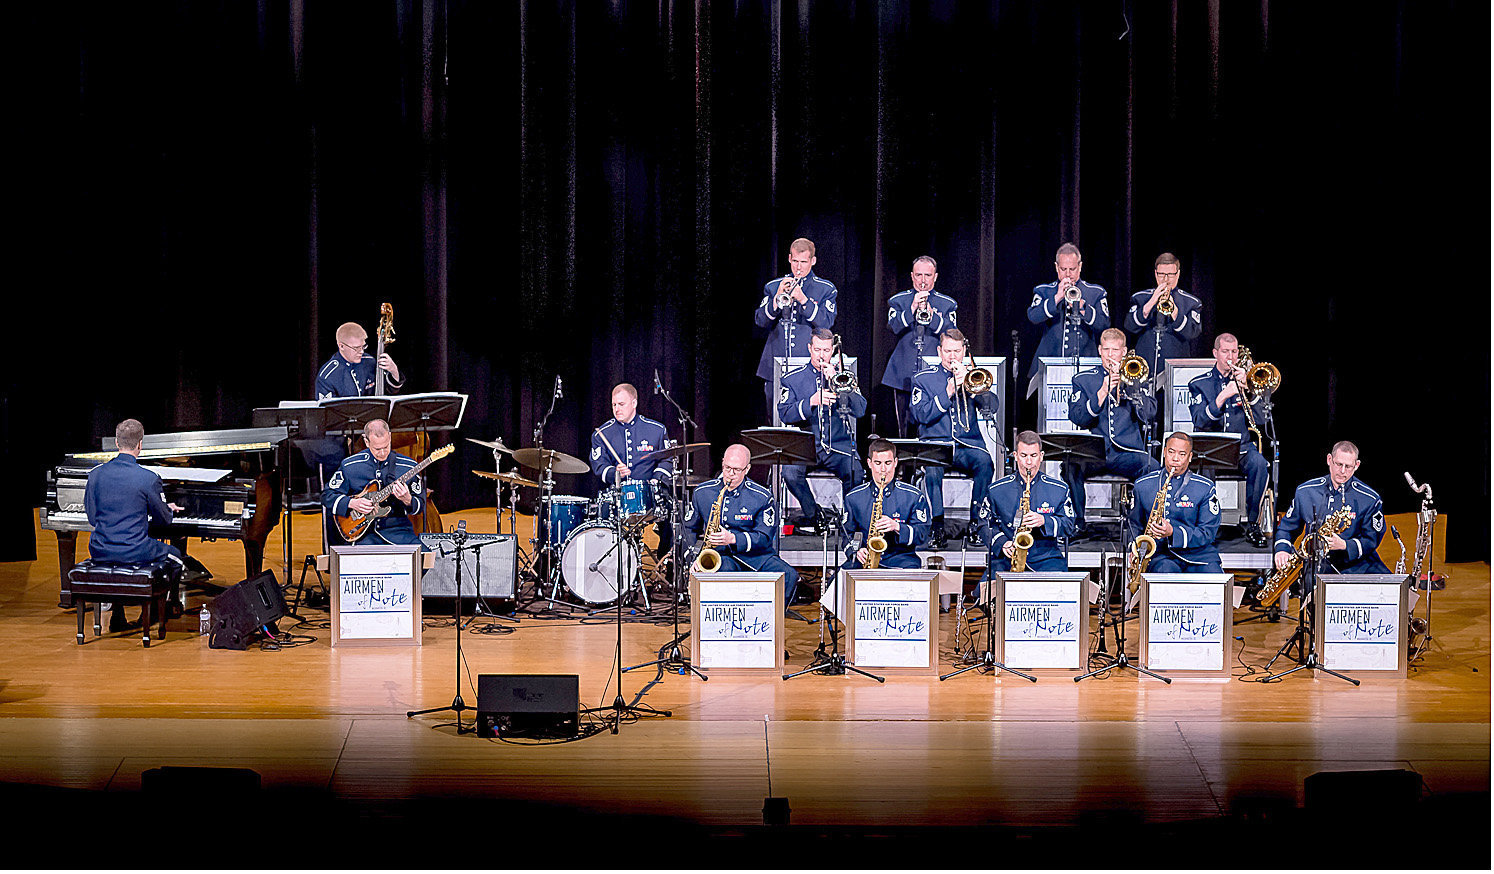 Airmen of Note concert is Nov. 17 | The Cleveland Daily Banner